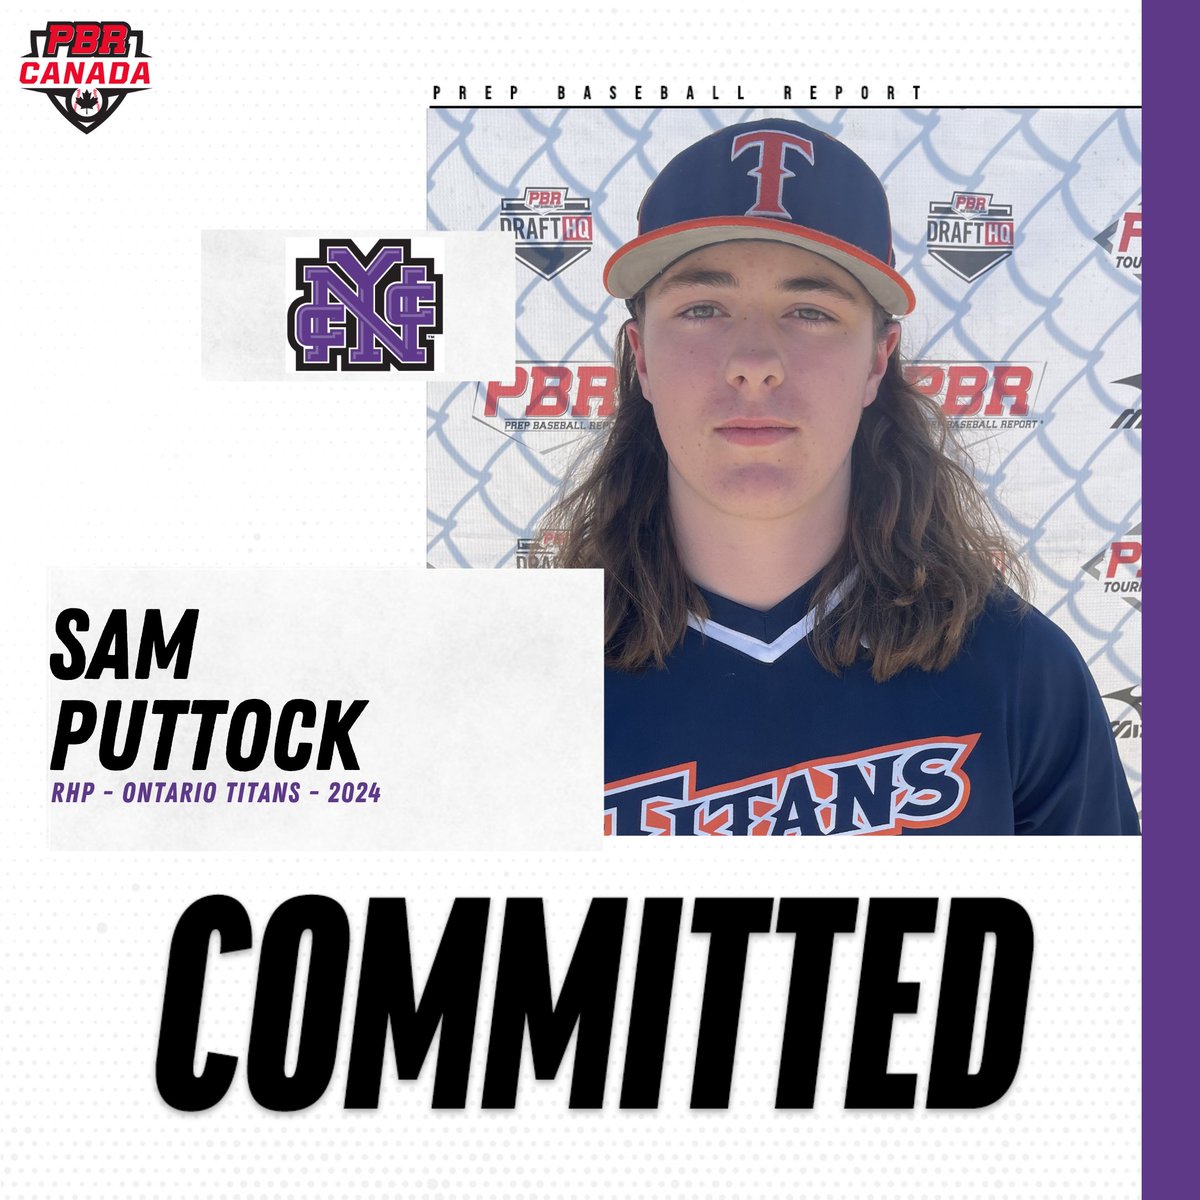 🚨𝐂𝐎𝐌𝐌𝐈𝐓𝐌𝐄𝐍𝐓 𝐀𝐋𝐄𝐑𝐓🚨 '24 RHP Sam Puttock (@sammyputt25) has announced his commitment to The City College of New York. #OffTheBoard || @CCNYBaseball